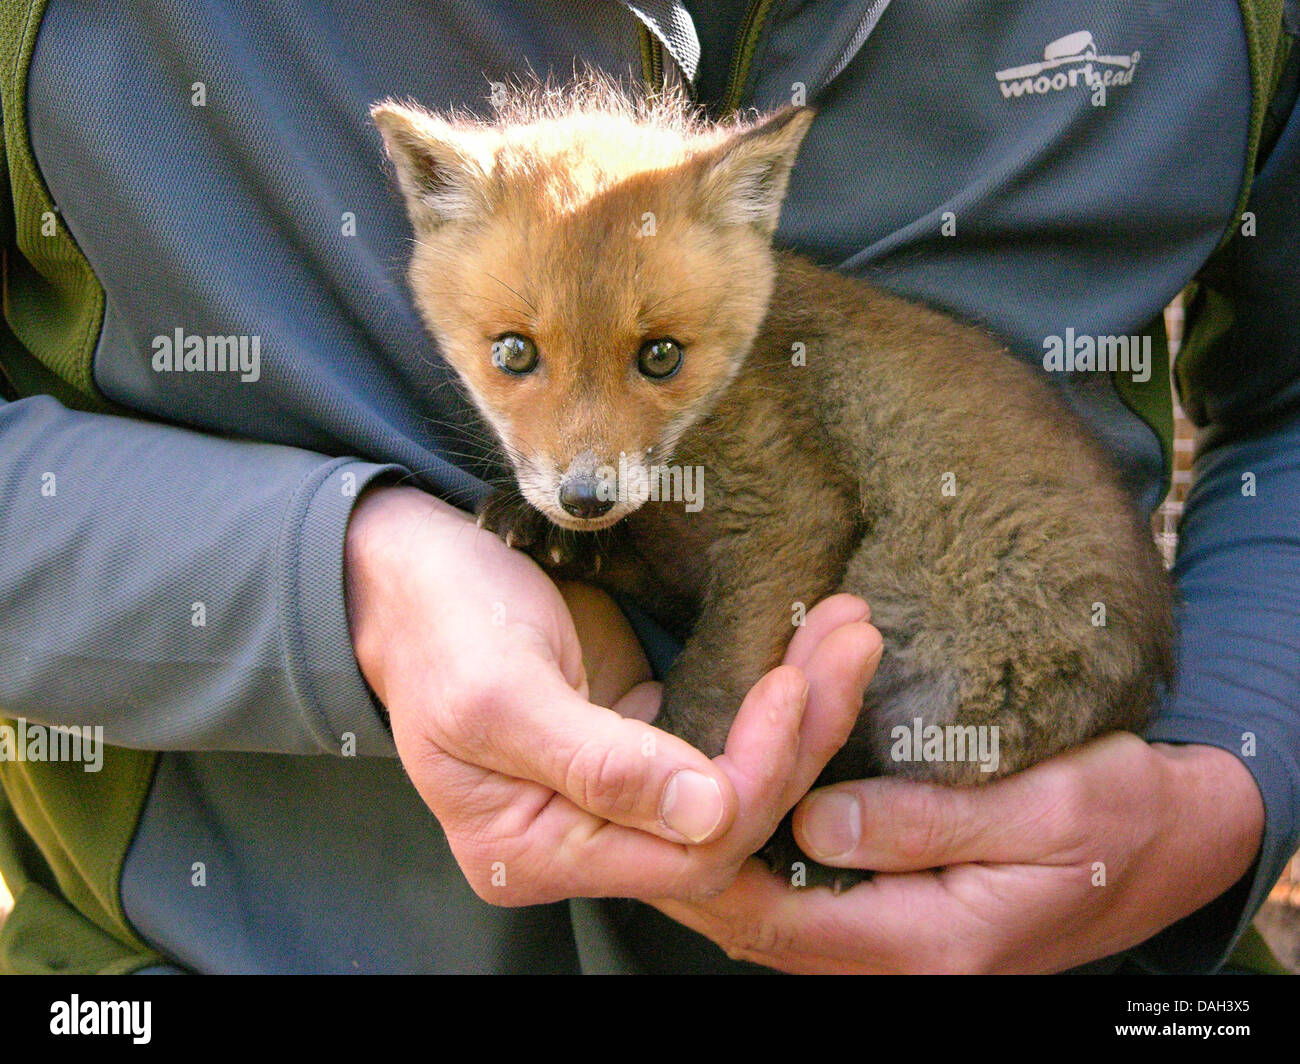 red fox (Vulpes vulpes), orphaned juvenile being upbrought by hand, Germany Stock Photo